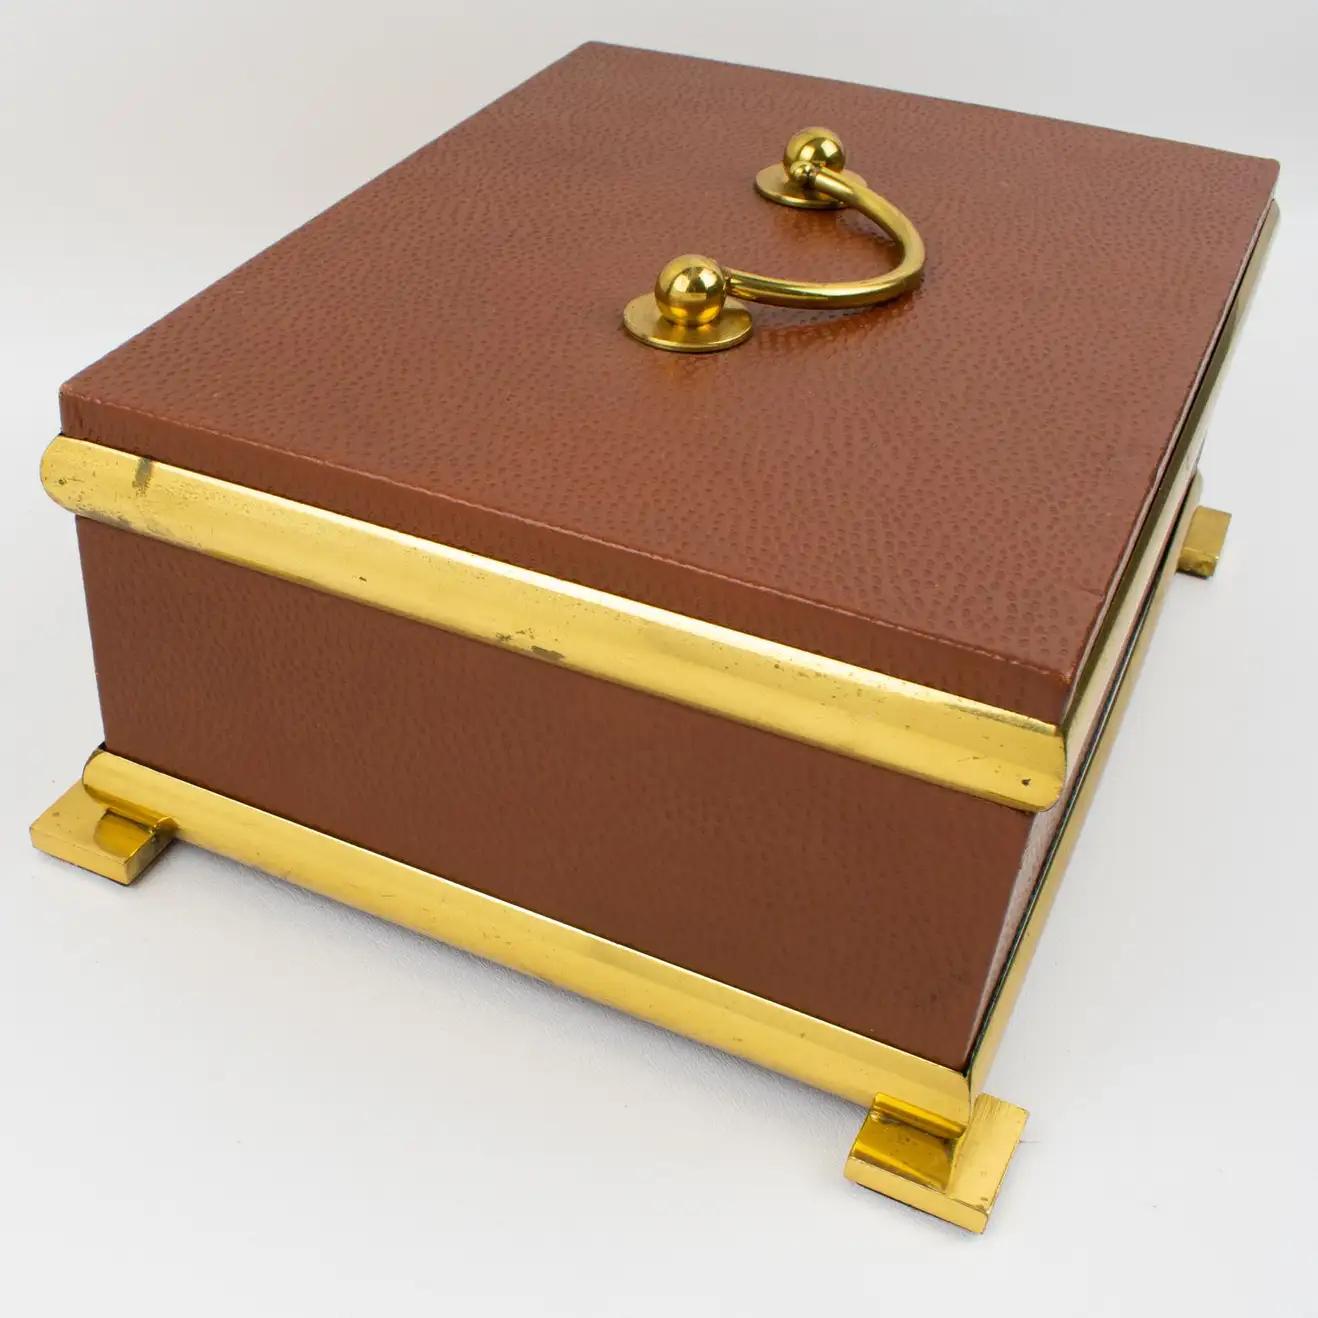 Italian Leather and Brass Decorative Box, 1950s Empire Style For Sale 7